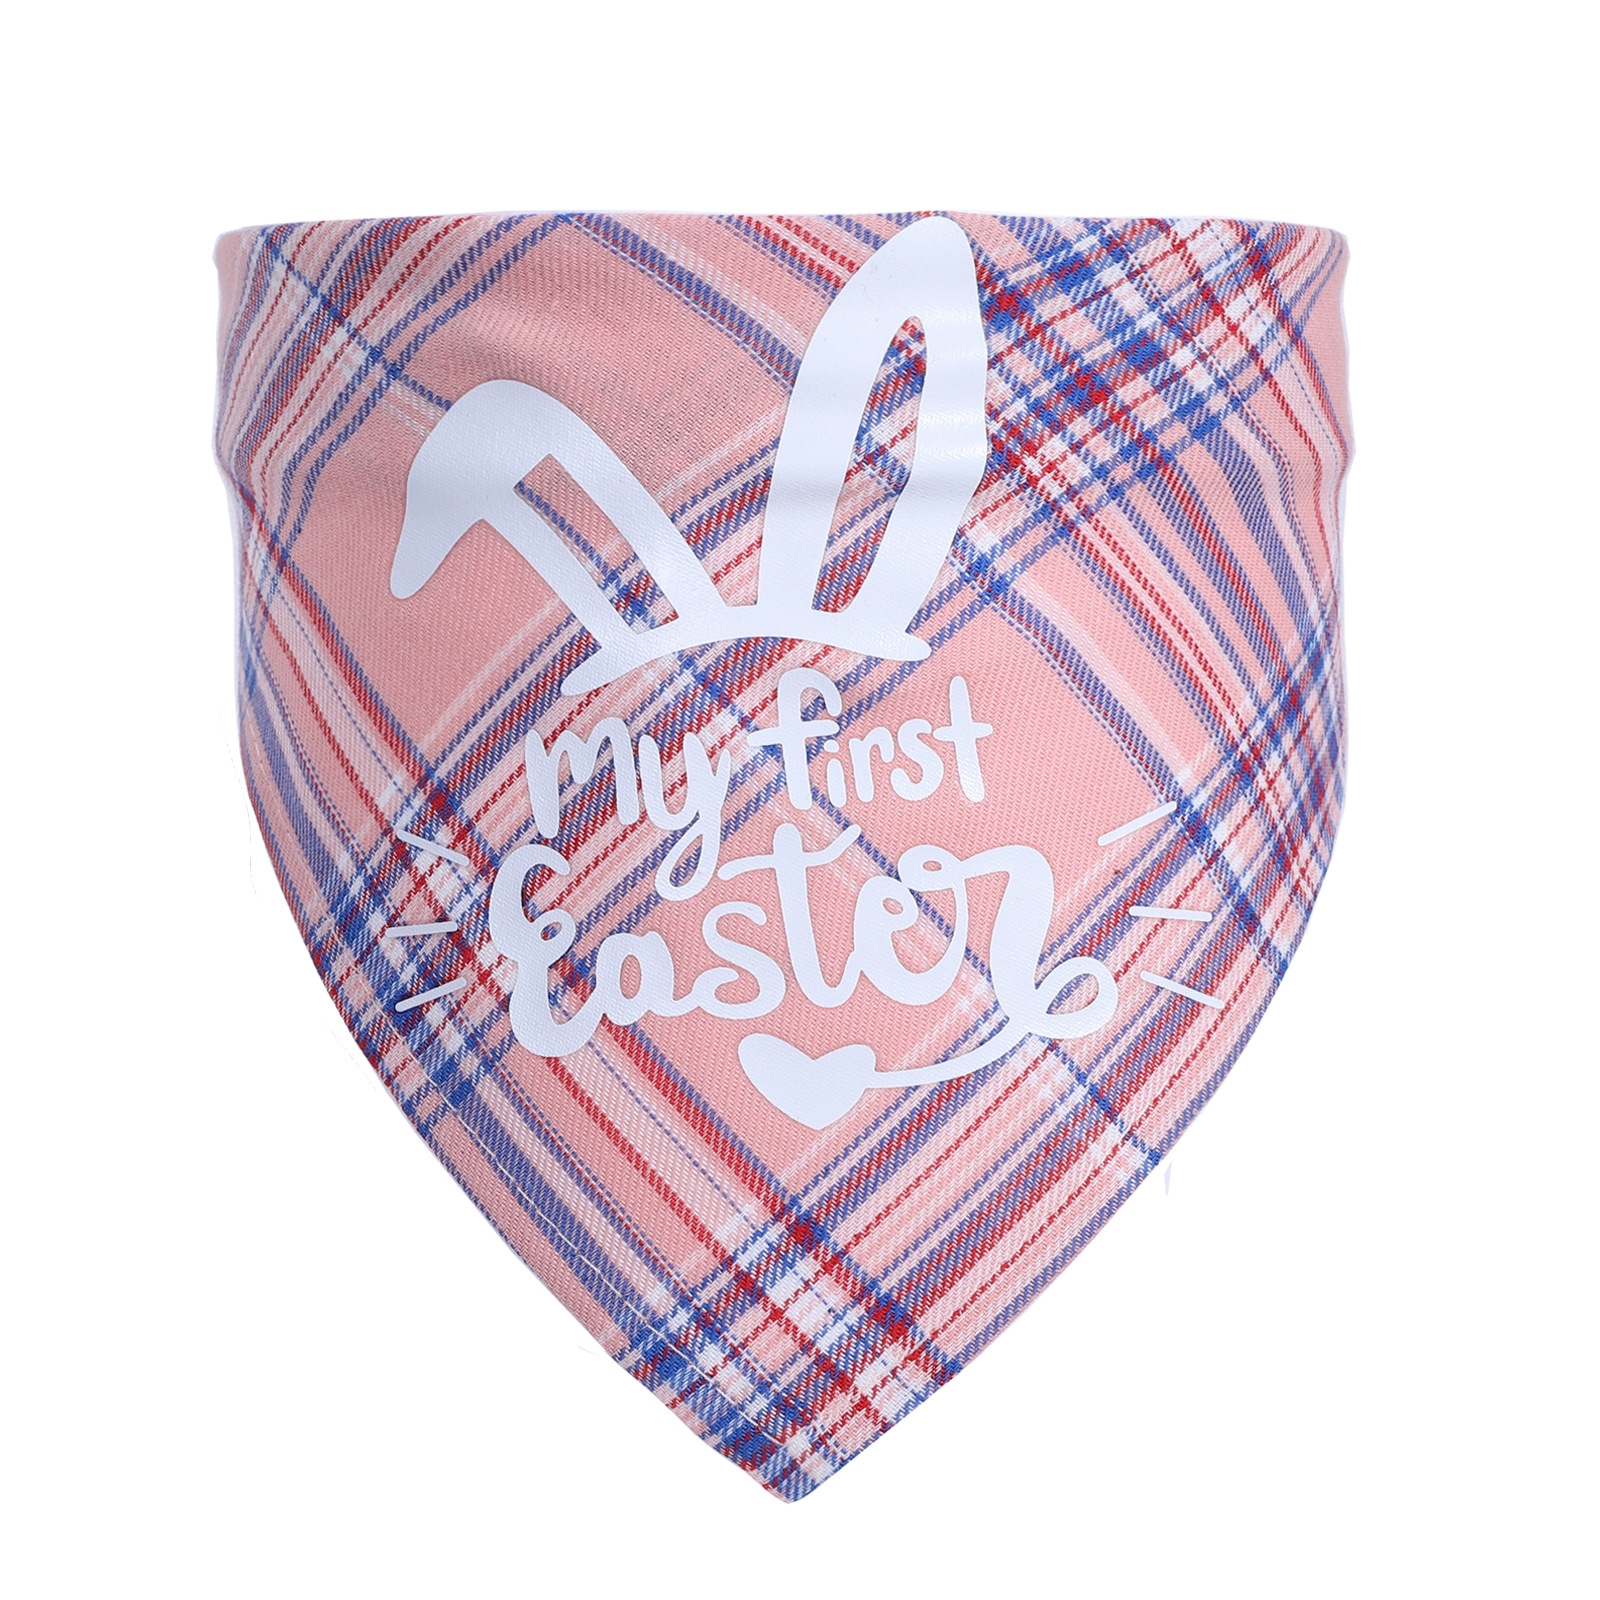 Get your furry friend in the Easter spirit with our adorable Easter bandanas for dogs! Made with soft and durable materials, these bandanas feature cute and colorful designs that will make your pooch the talk of the town during the Easter holiday.